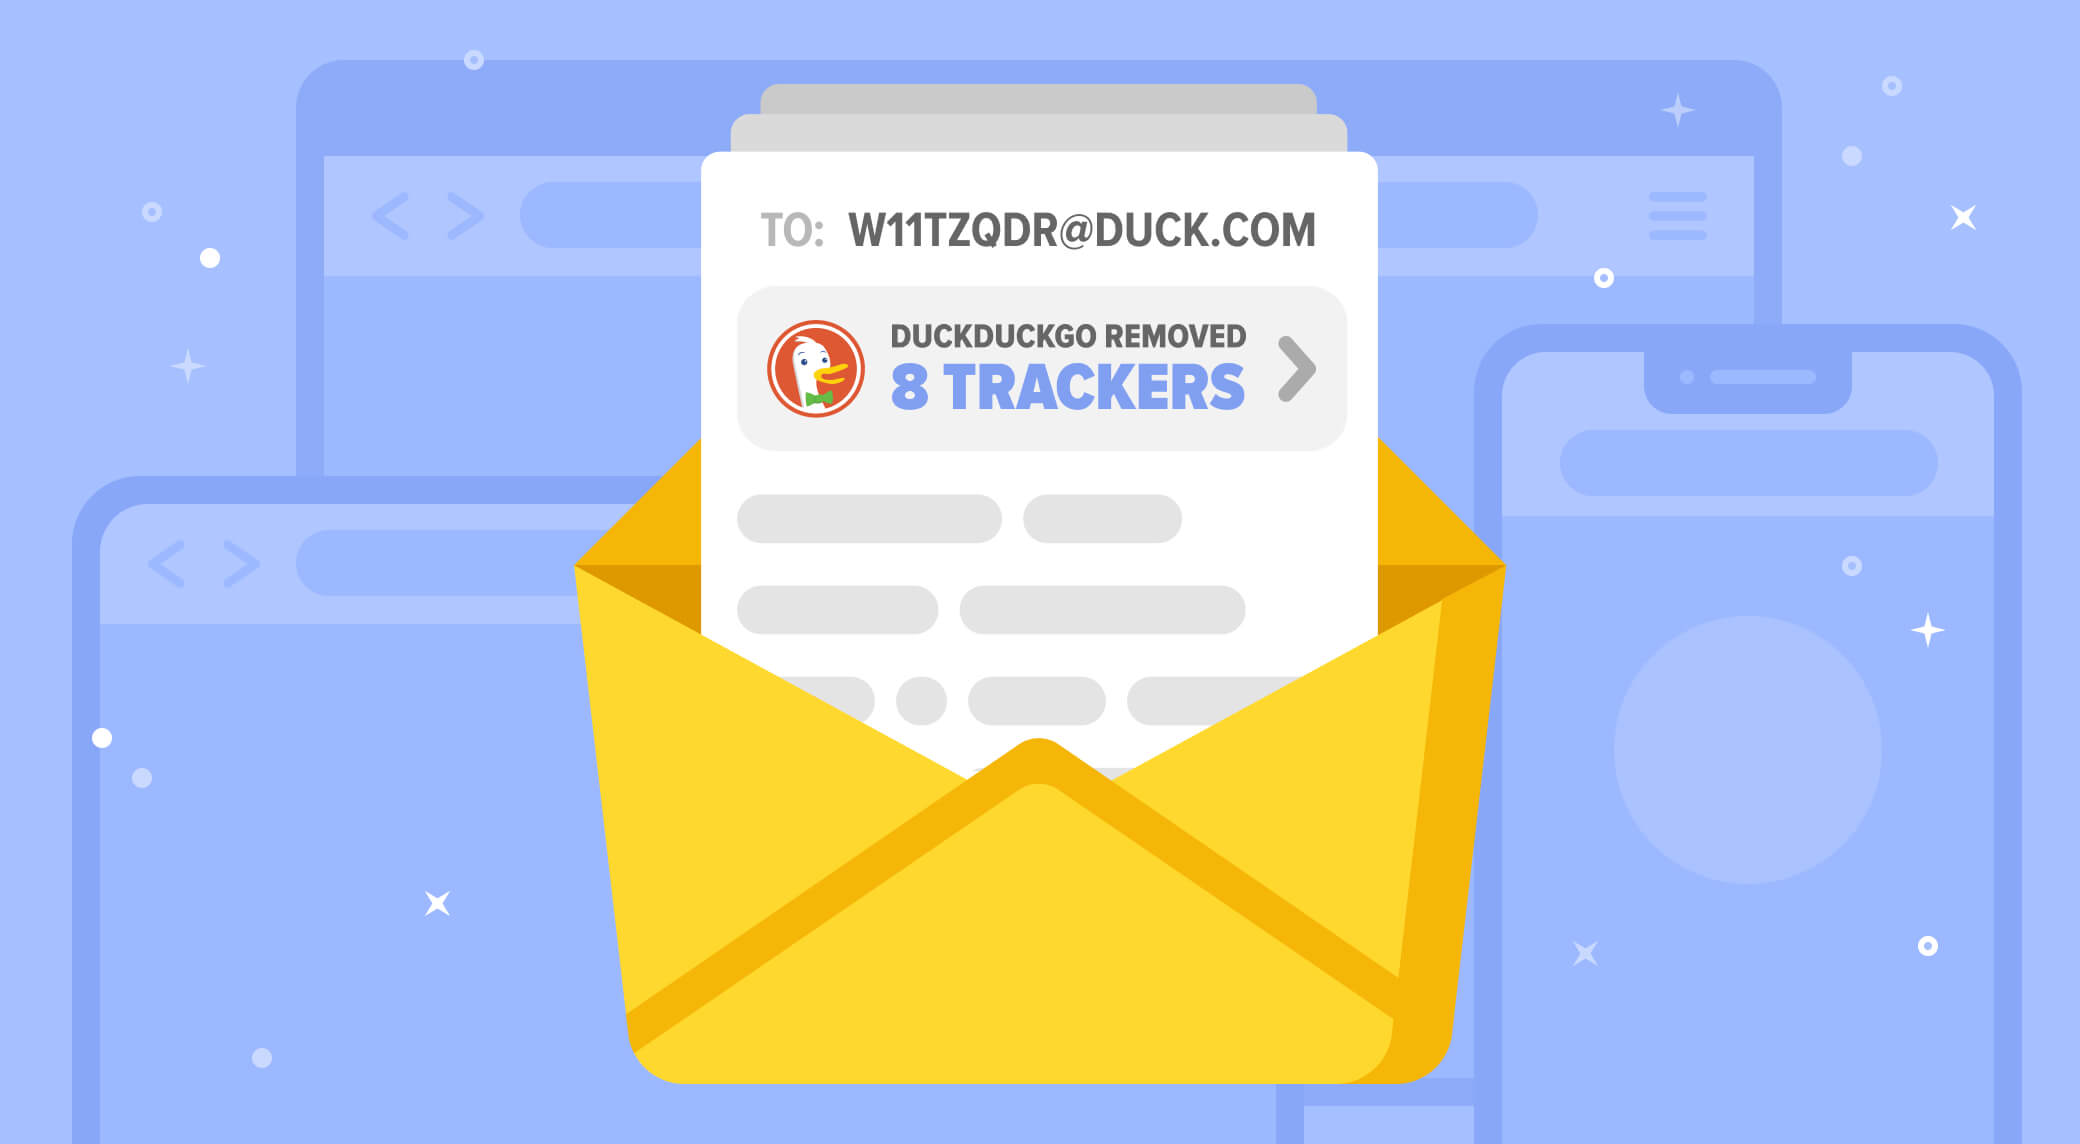 Protect Your Inbox: DuckDuckGo Email Protection Beta Now Open to All!